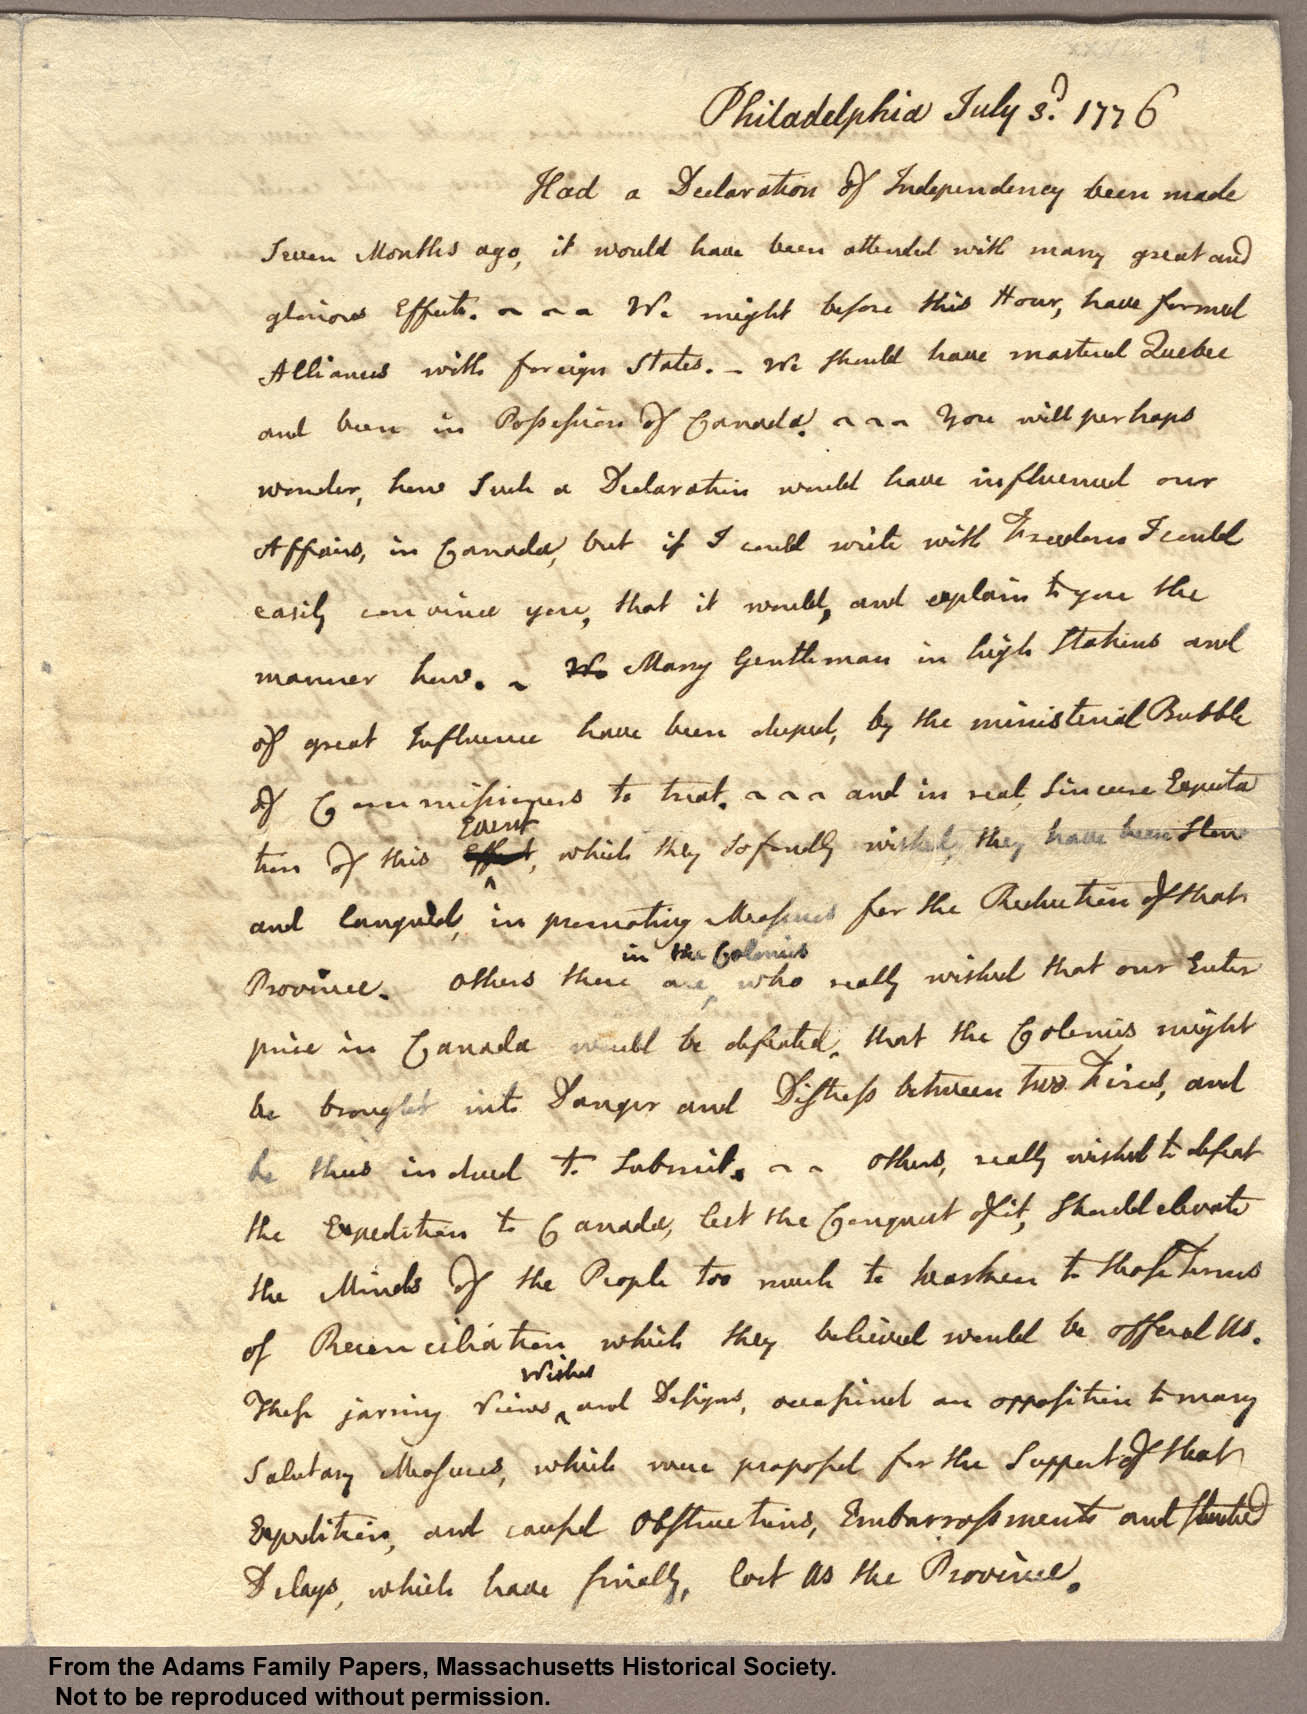 Photo of a Letter from John Adams